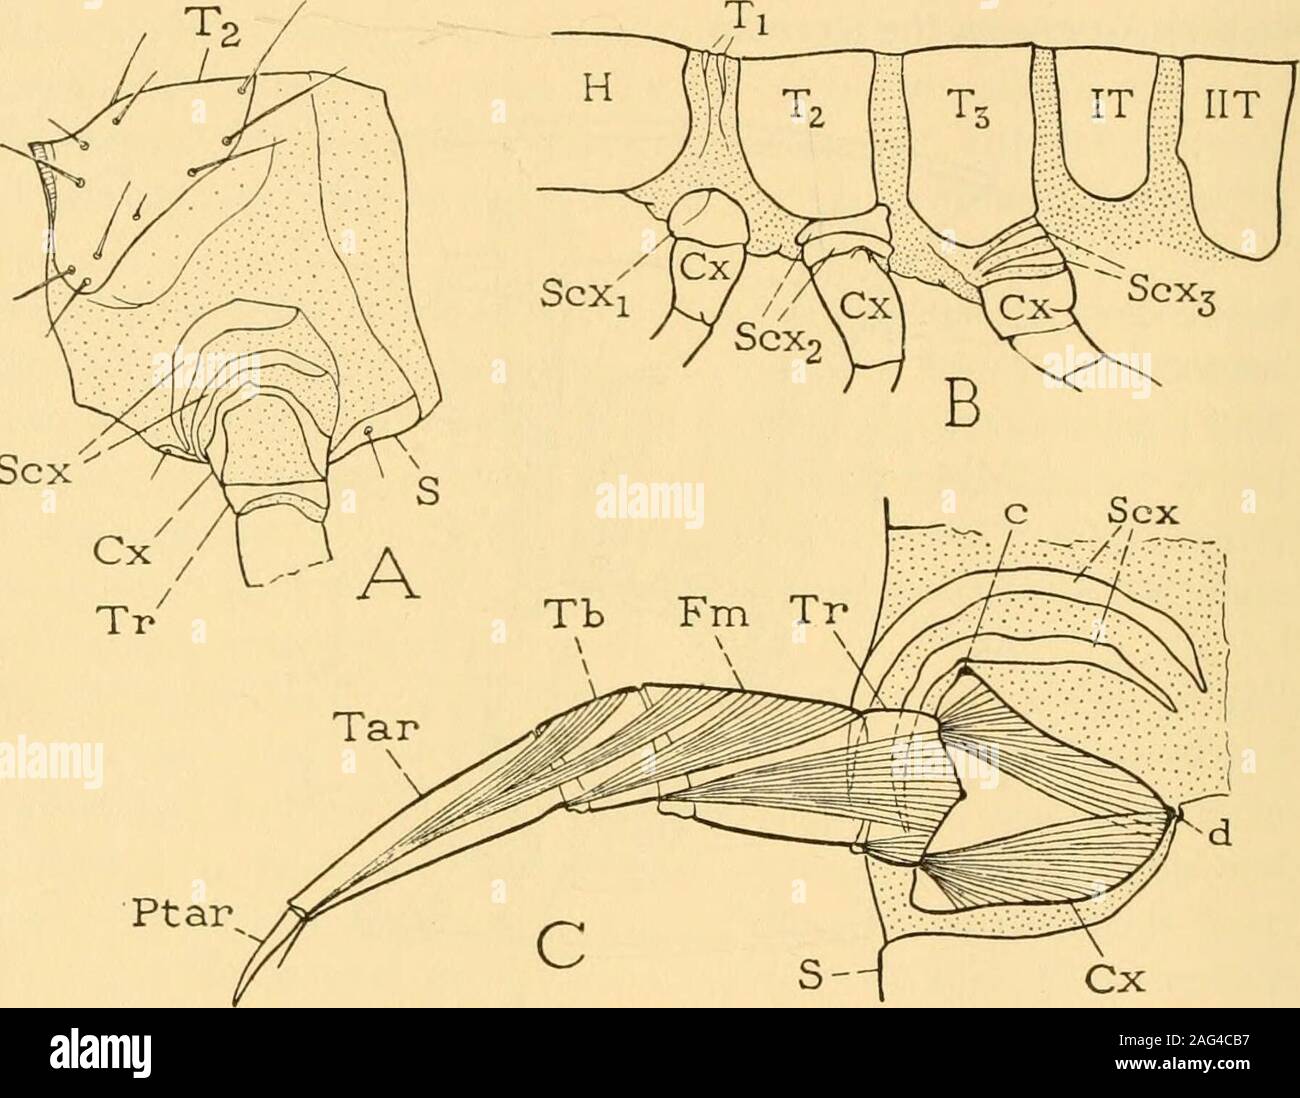 . Smithsonian miscellaneous collections. or muscle of the leg base (fig. 11, /) retains its connection withthe subcoxa in the more generalized pterygote insects, being insertedon the trochantinal sclerite of the subcoxa (Tn) except when thetrochantin is lost, the muscle then having its insertion on the anteriorangle of the coxal base. The remotor muscle (J), which may be repre-sented by several fiber bundles, is always inserted on the coxa or oncoxal apodemes. The anterior and posterior sternal muscles (K, L)arise on the sterna or the sternal apophysis, or on the spinasternum. i6 SMITHSONIAN M Stock Photo